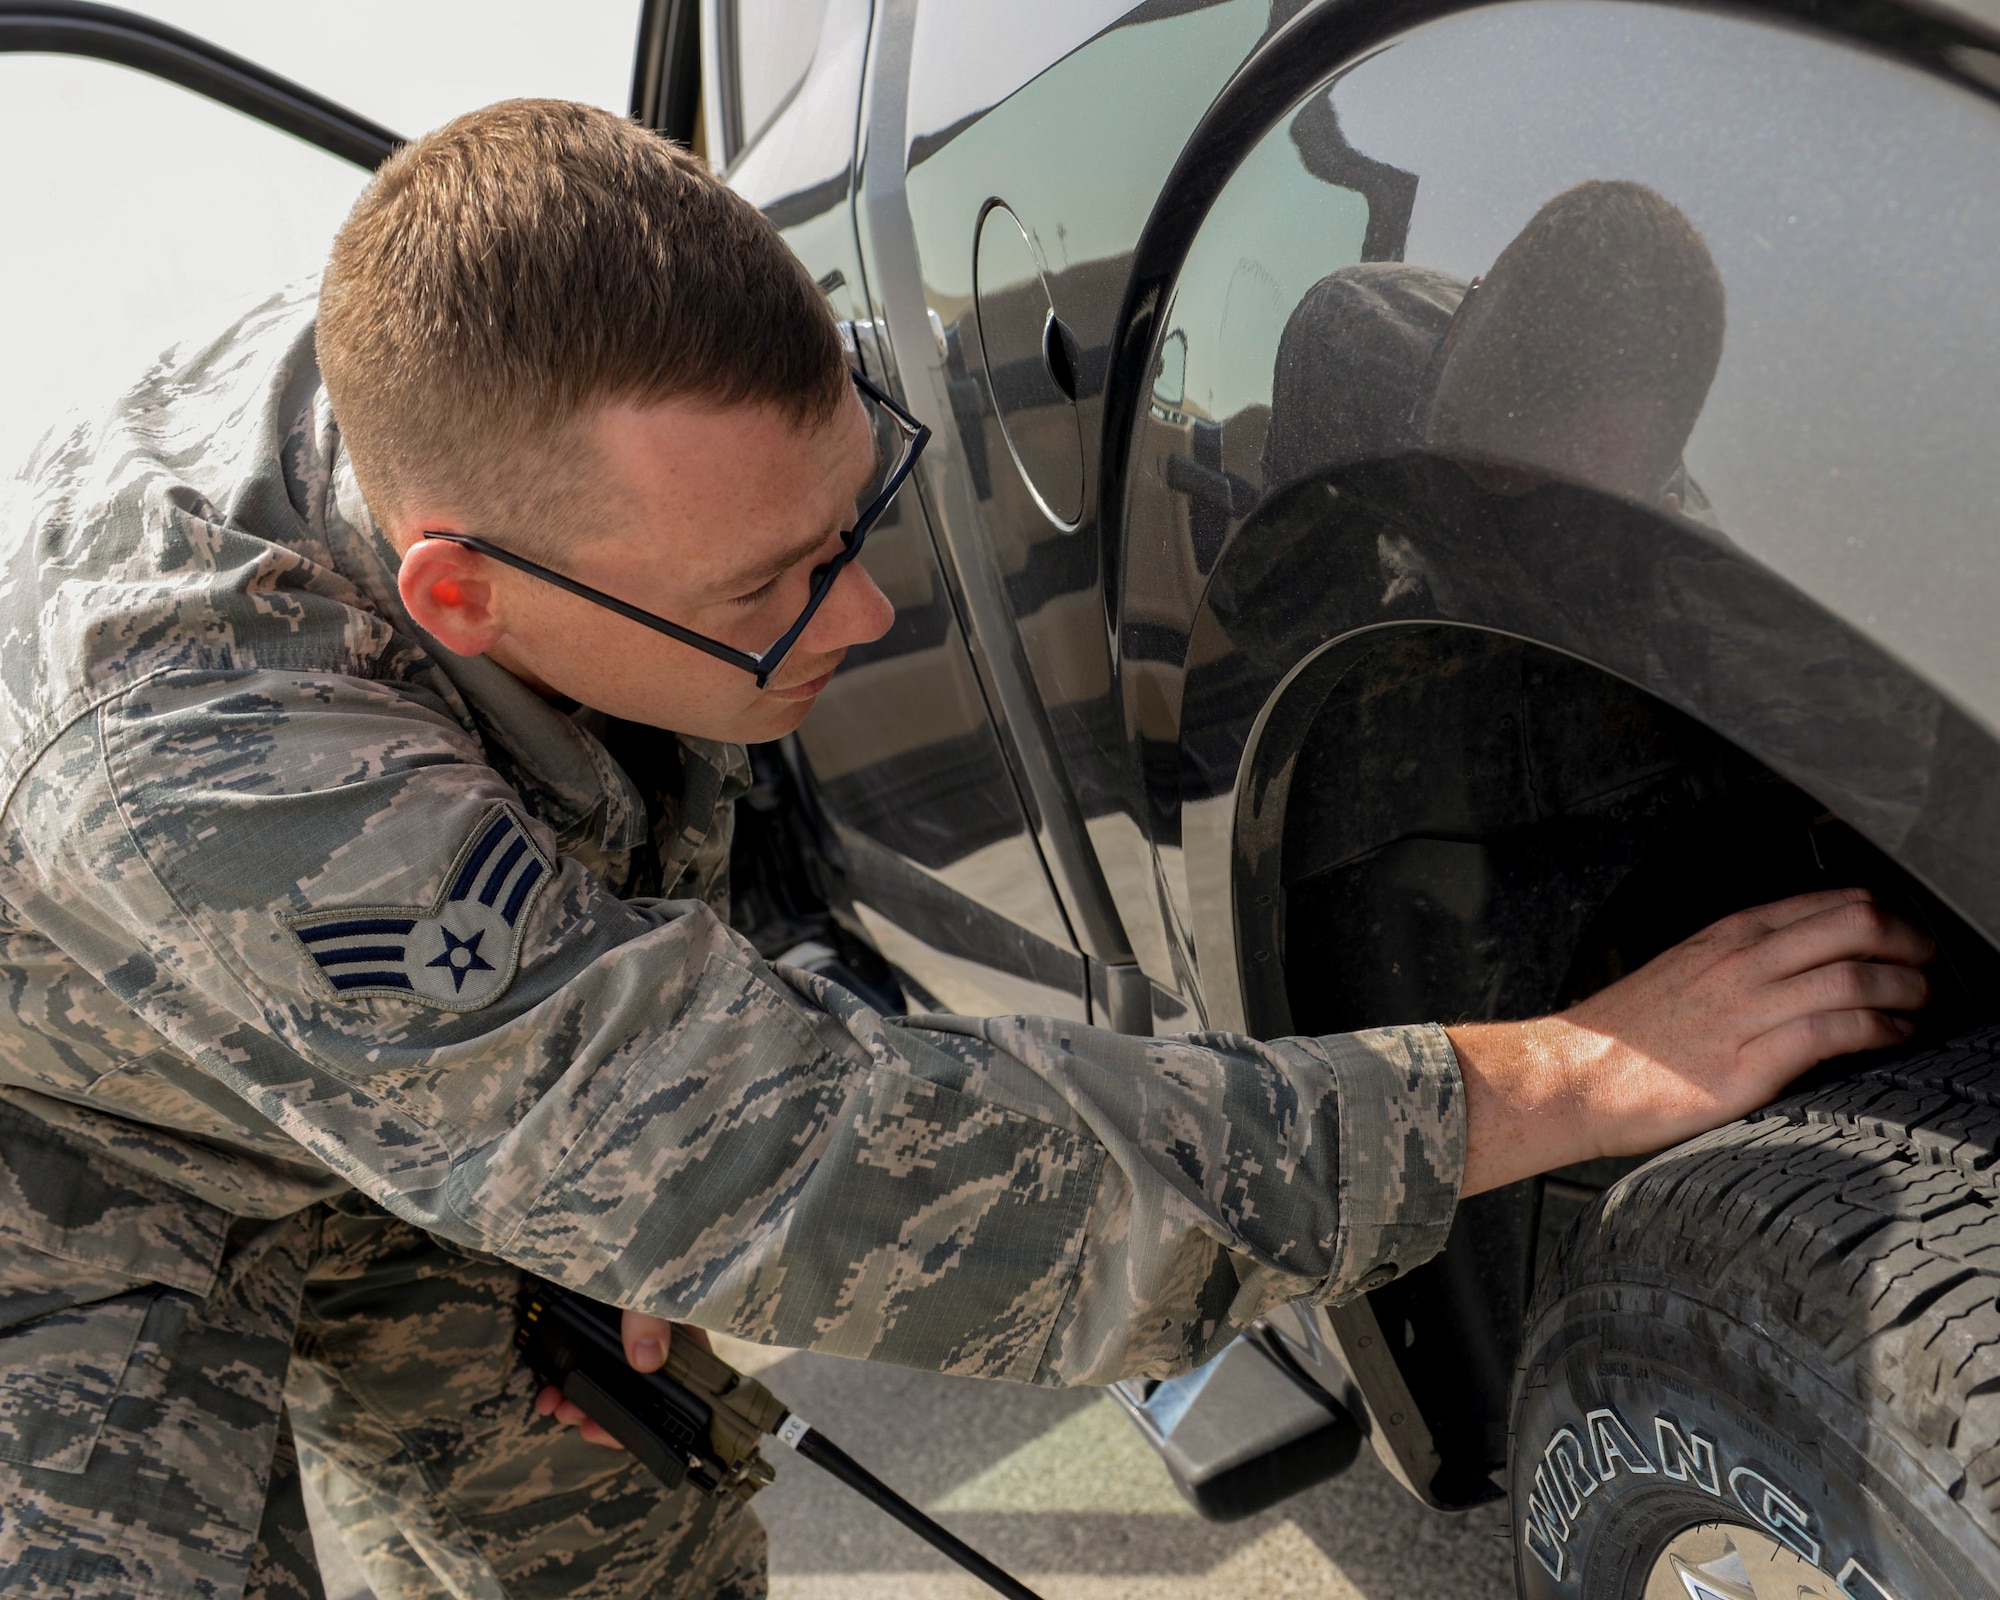 U.S. Air Force Senior Airman Thomas Smith, airfield management shift lead assigned to the 379th Expeditionary Office of Strategic Services, checks his vehicle tires for foreign objects by completing a foreign object damage (FOD) check prior to driving onto the runway at Al Udeid, Air Force Base, Qatar, June 7, 2017. Airfield Management oversees the 23.3 million square feet of airfield at Al Udeid in addition to overseeing the airfield driving program and filing all flight plans for flights arriving to and departing from the base. (U.S. Air National Guard photo by Tech. Sgt. Bradly A. Schneider/Released)